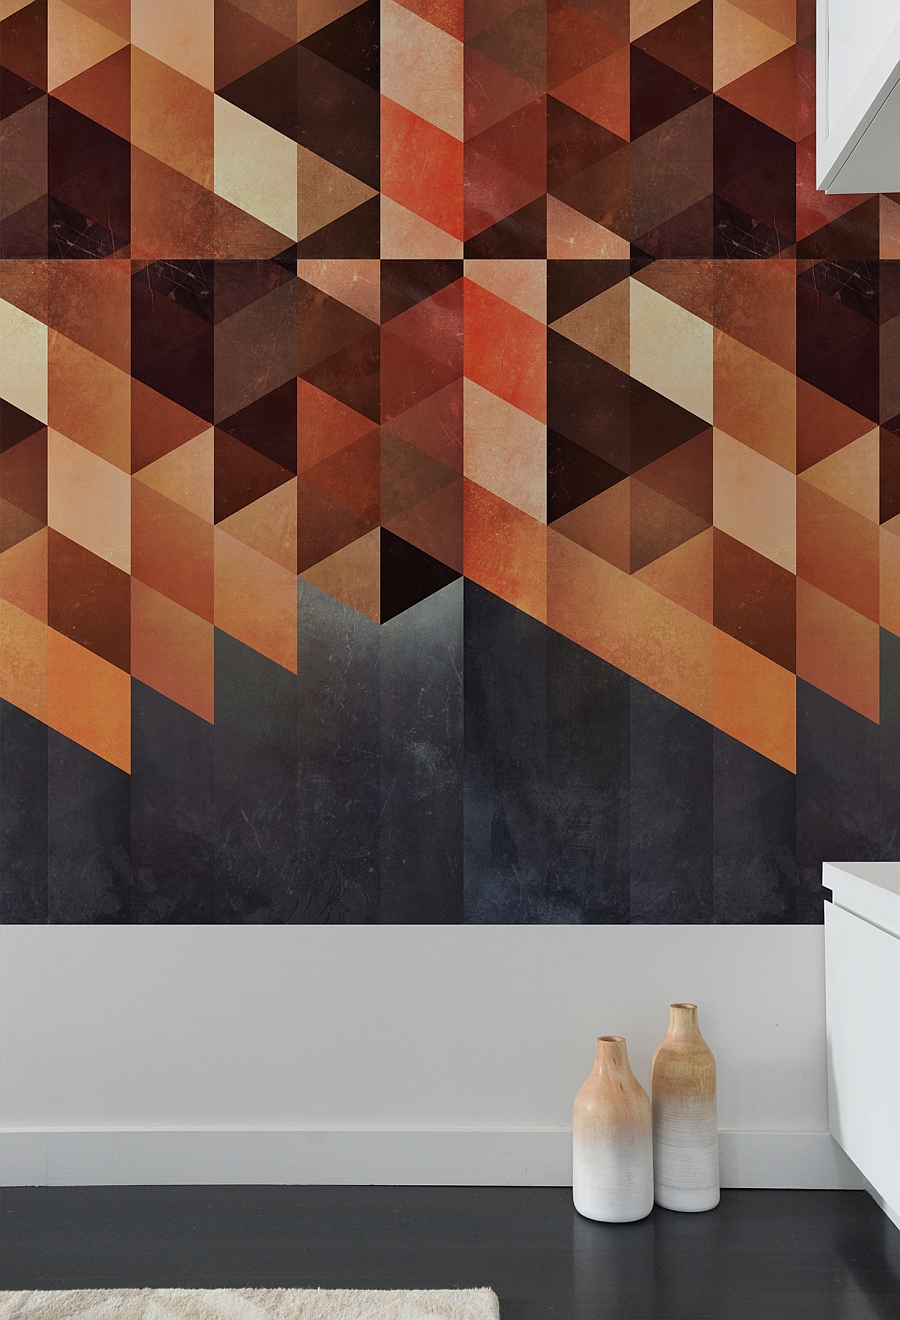 Create A Captivating Accent Wall With Geometric-Patterned Wall Tiles